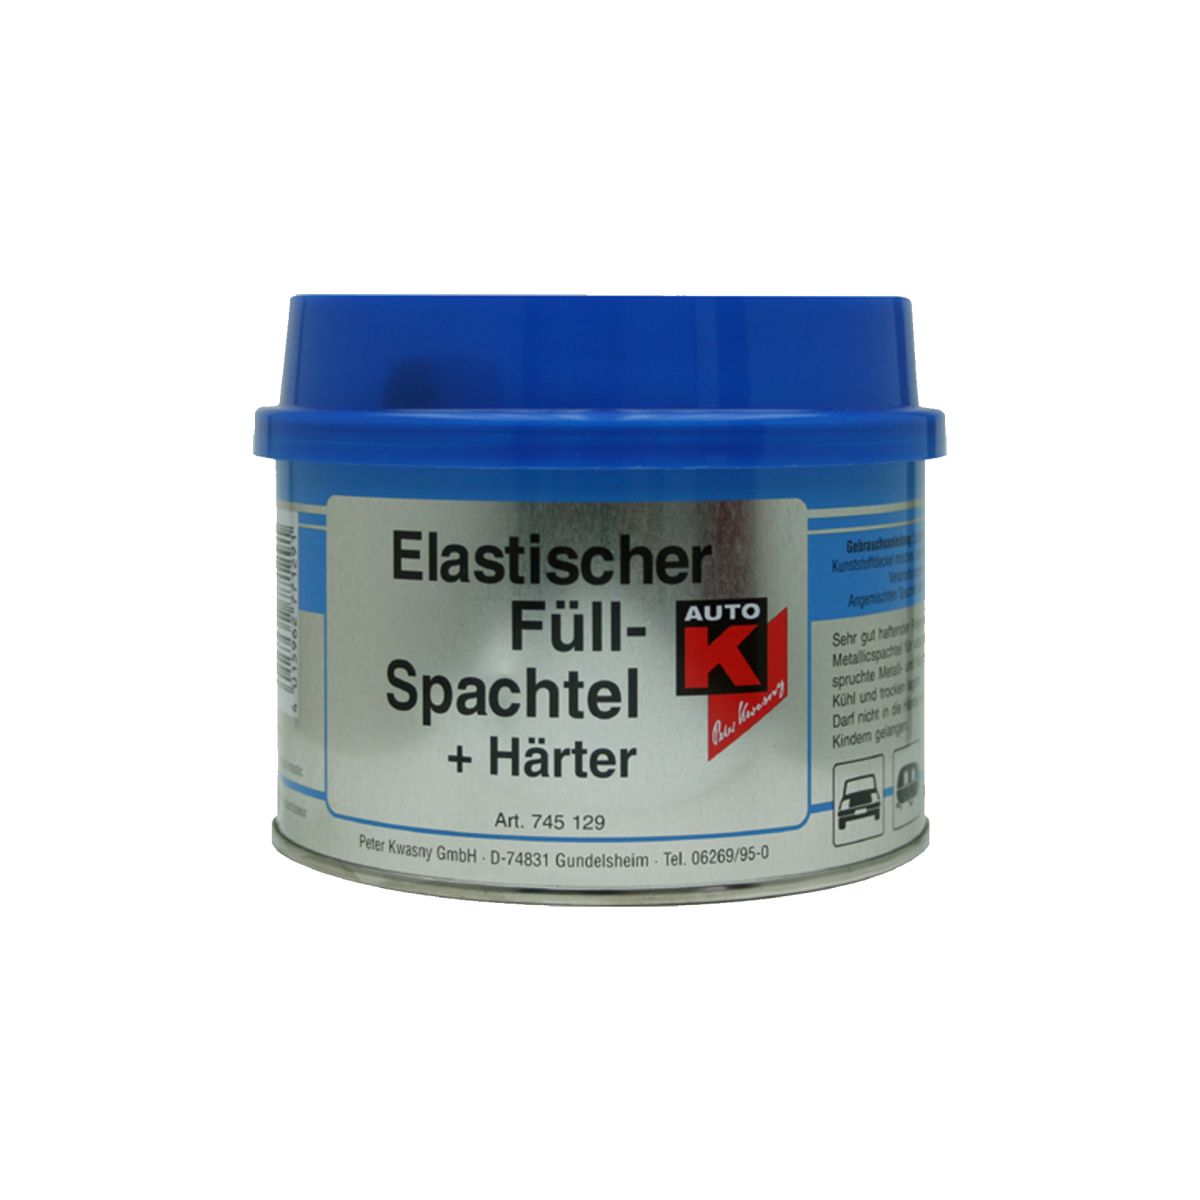 Elastic polyester filler putty is mixed with...